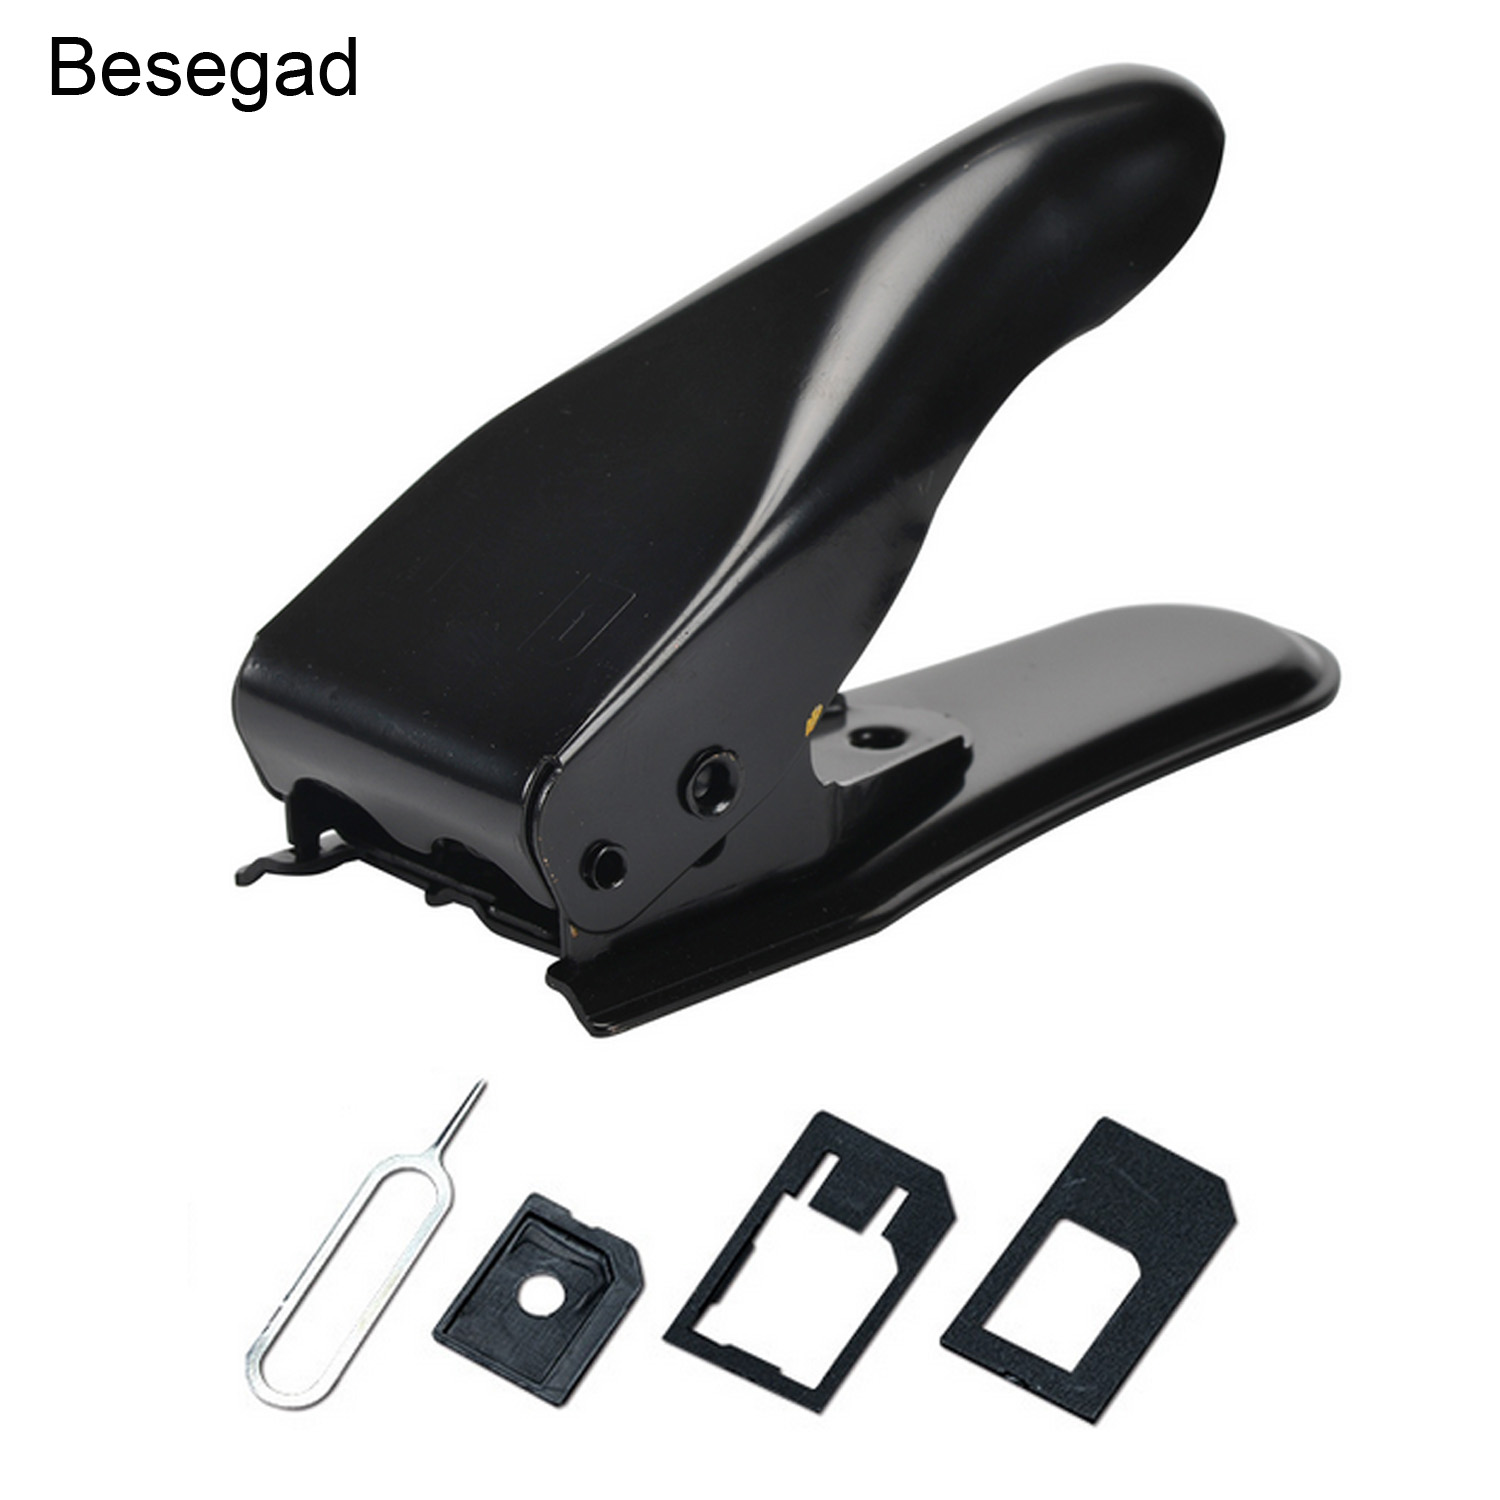 Besegad Dual 2 in 1 Micro SIM Cutter with Nano SIM Card Adapter Tray Open Needle for iPhone Samsung Xiaomi Mobile Phone Tablet